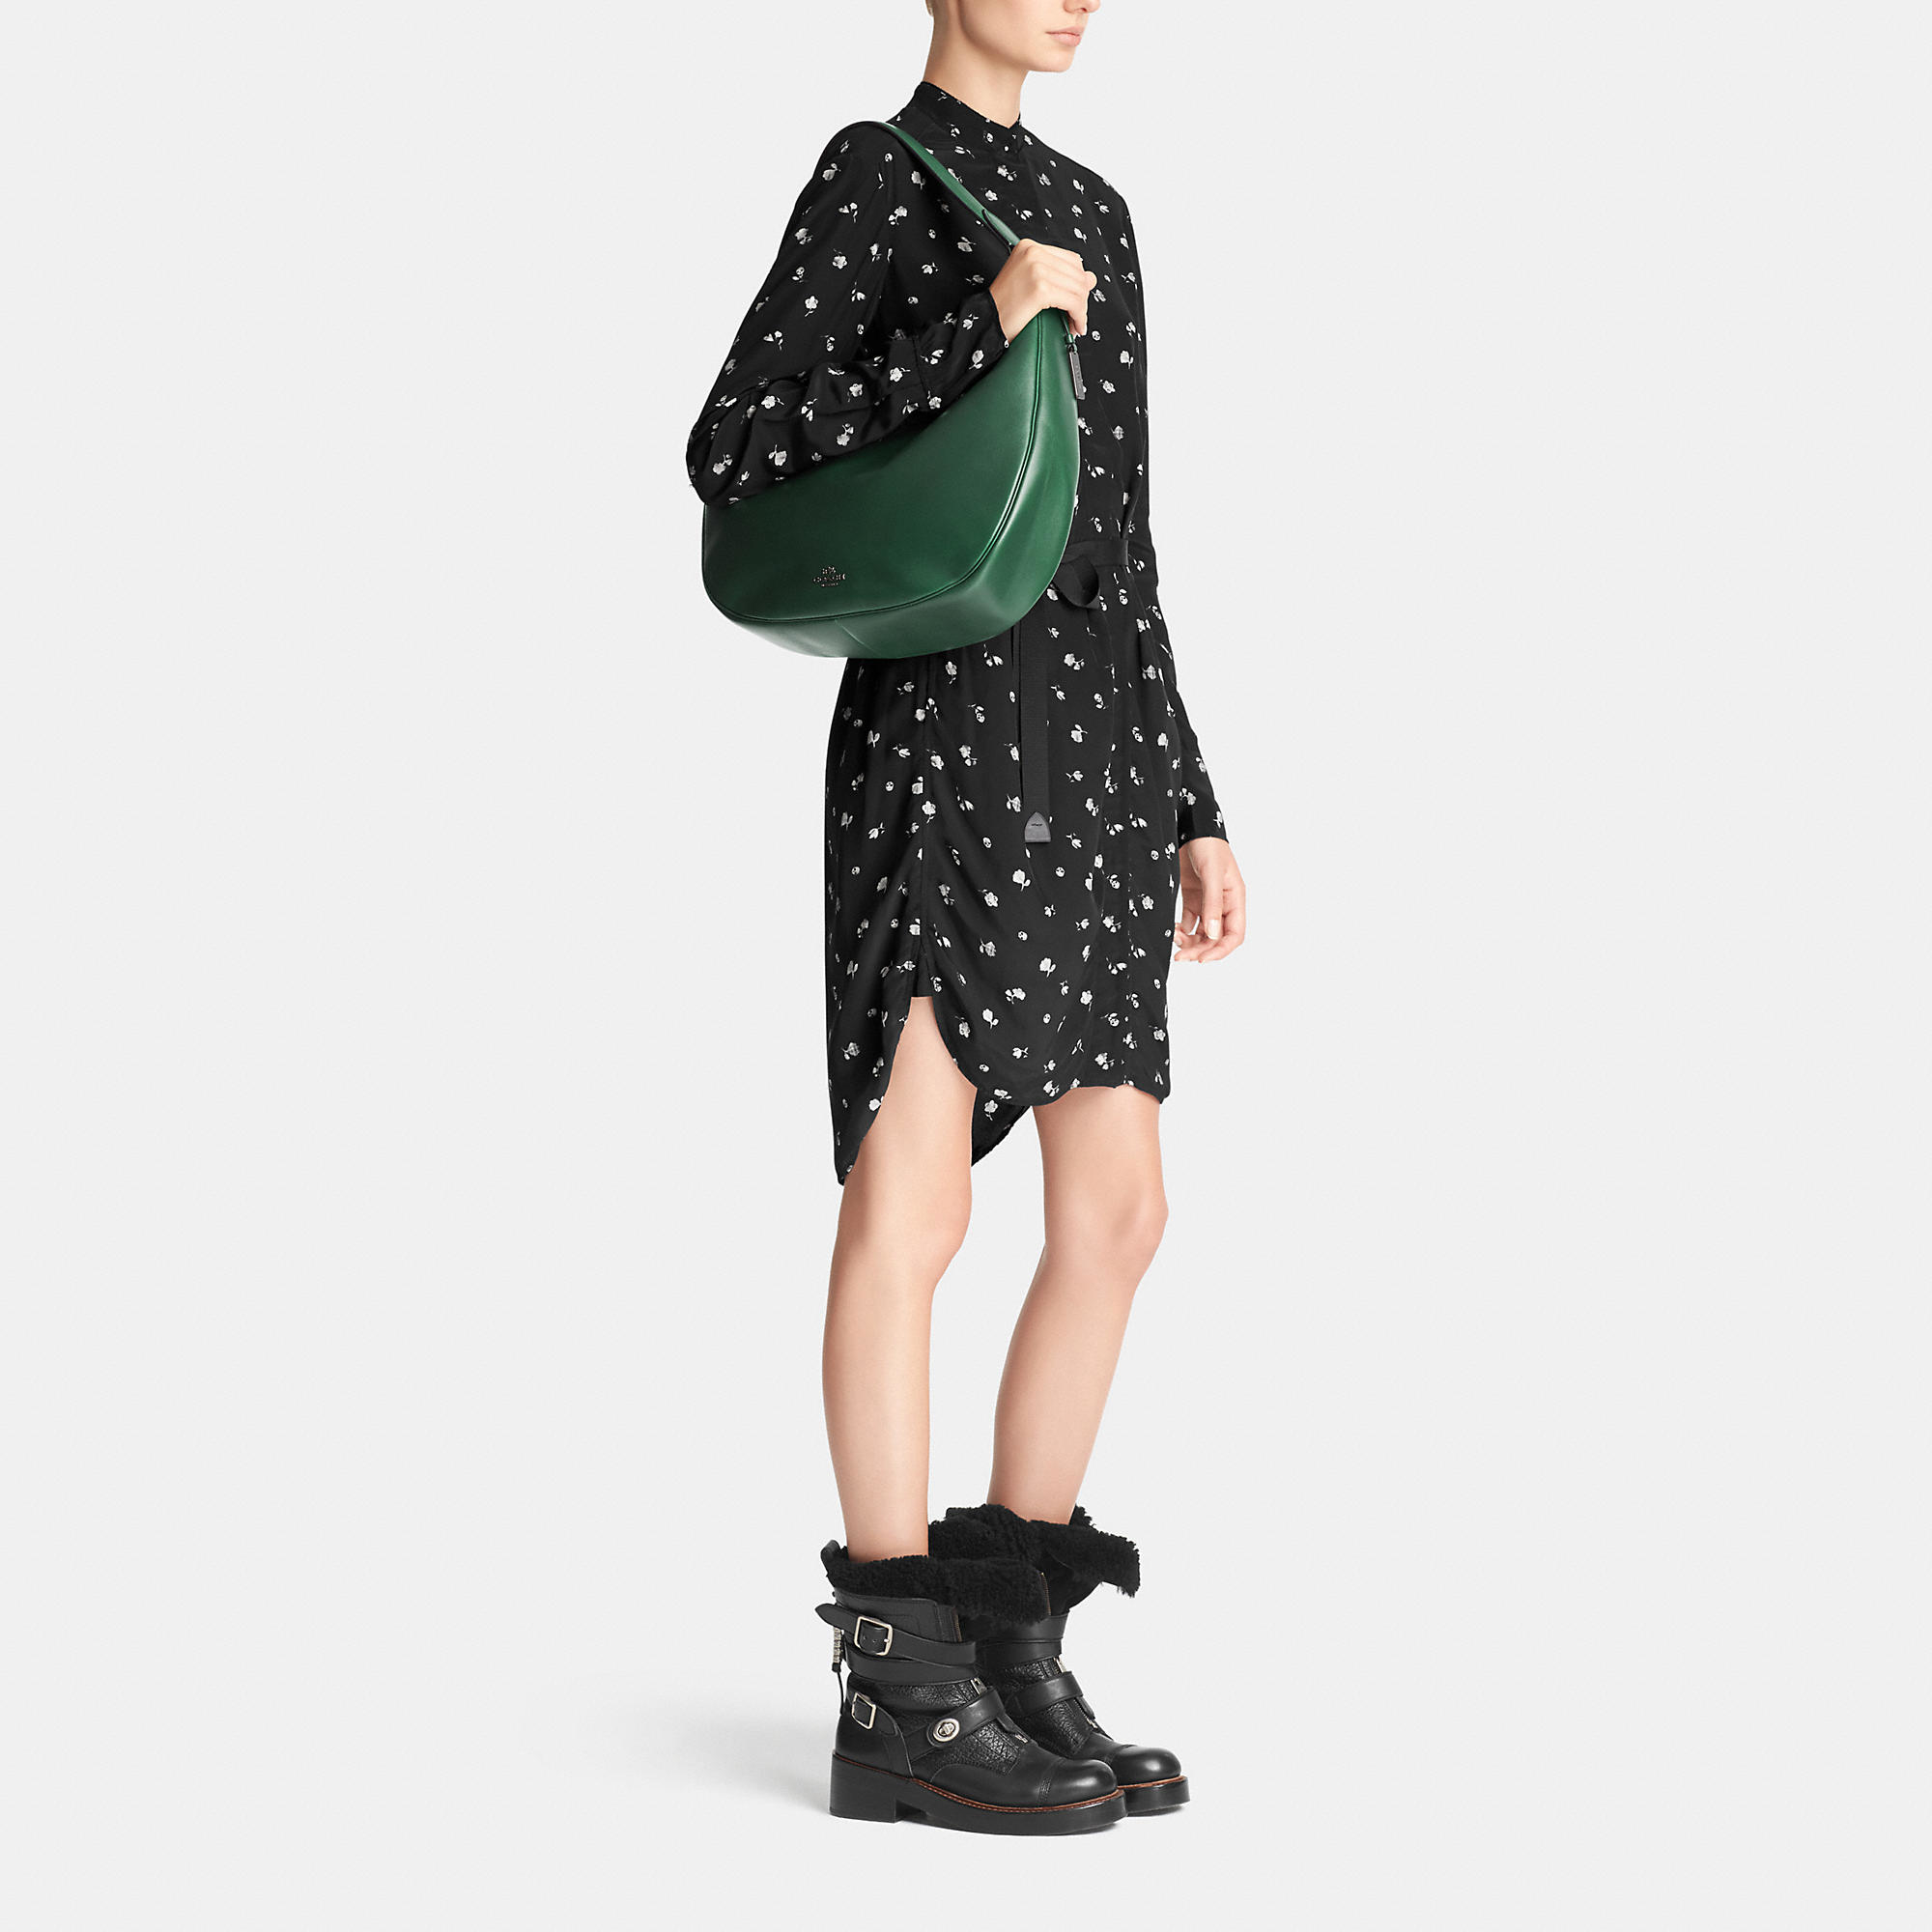 Lyst - Coach Nomad Hobo In Glovetanned Leather in Green